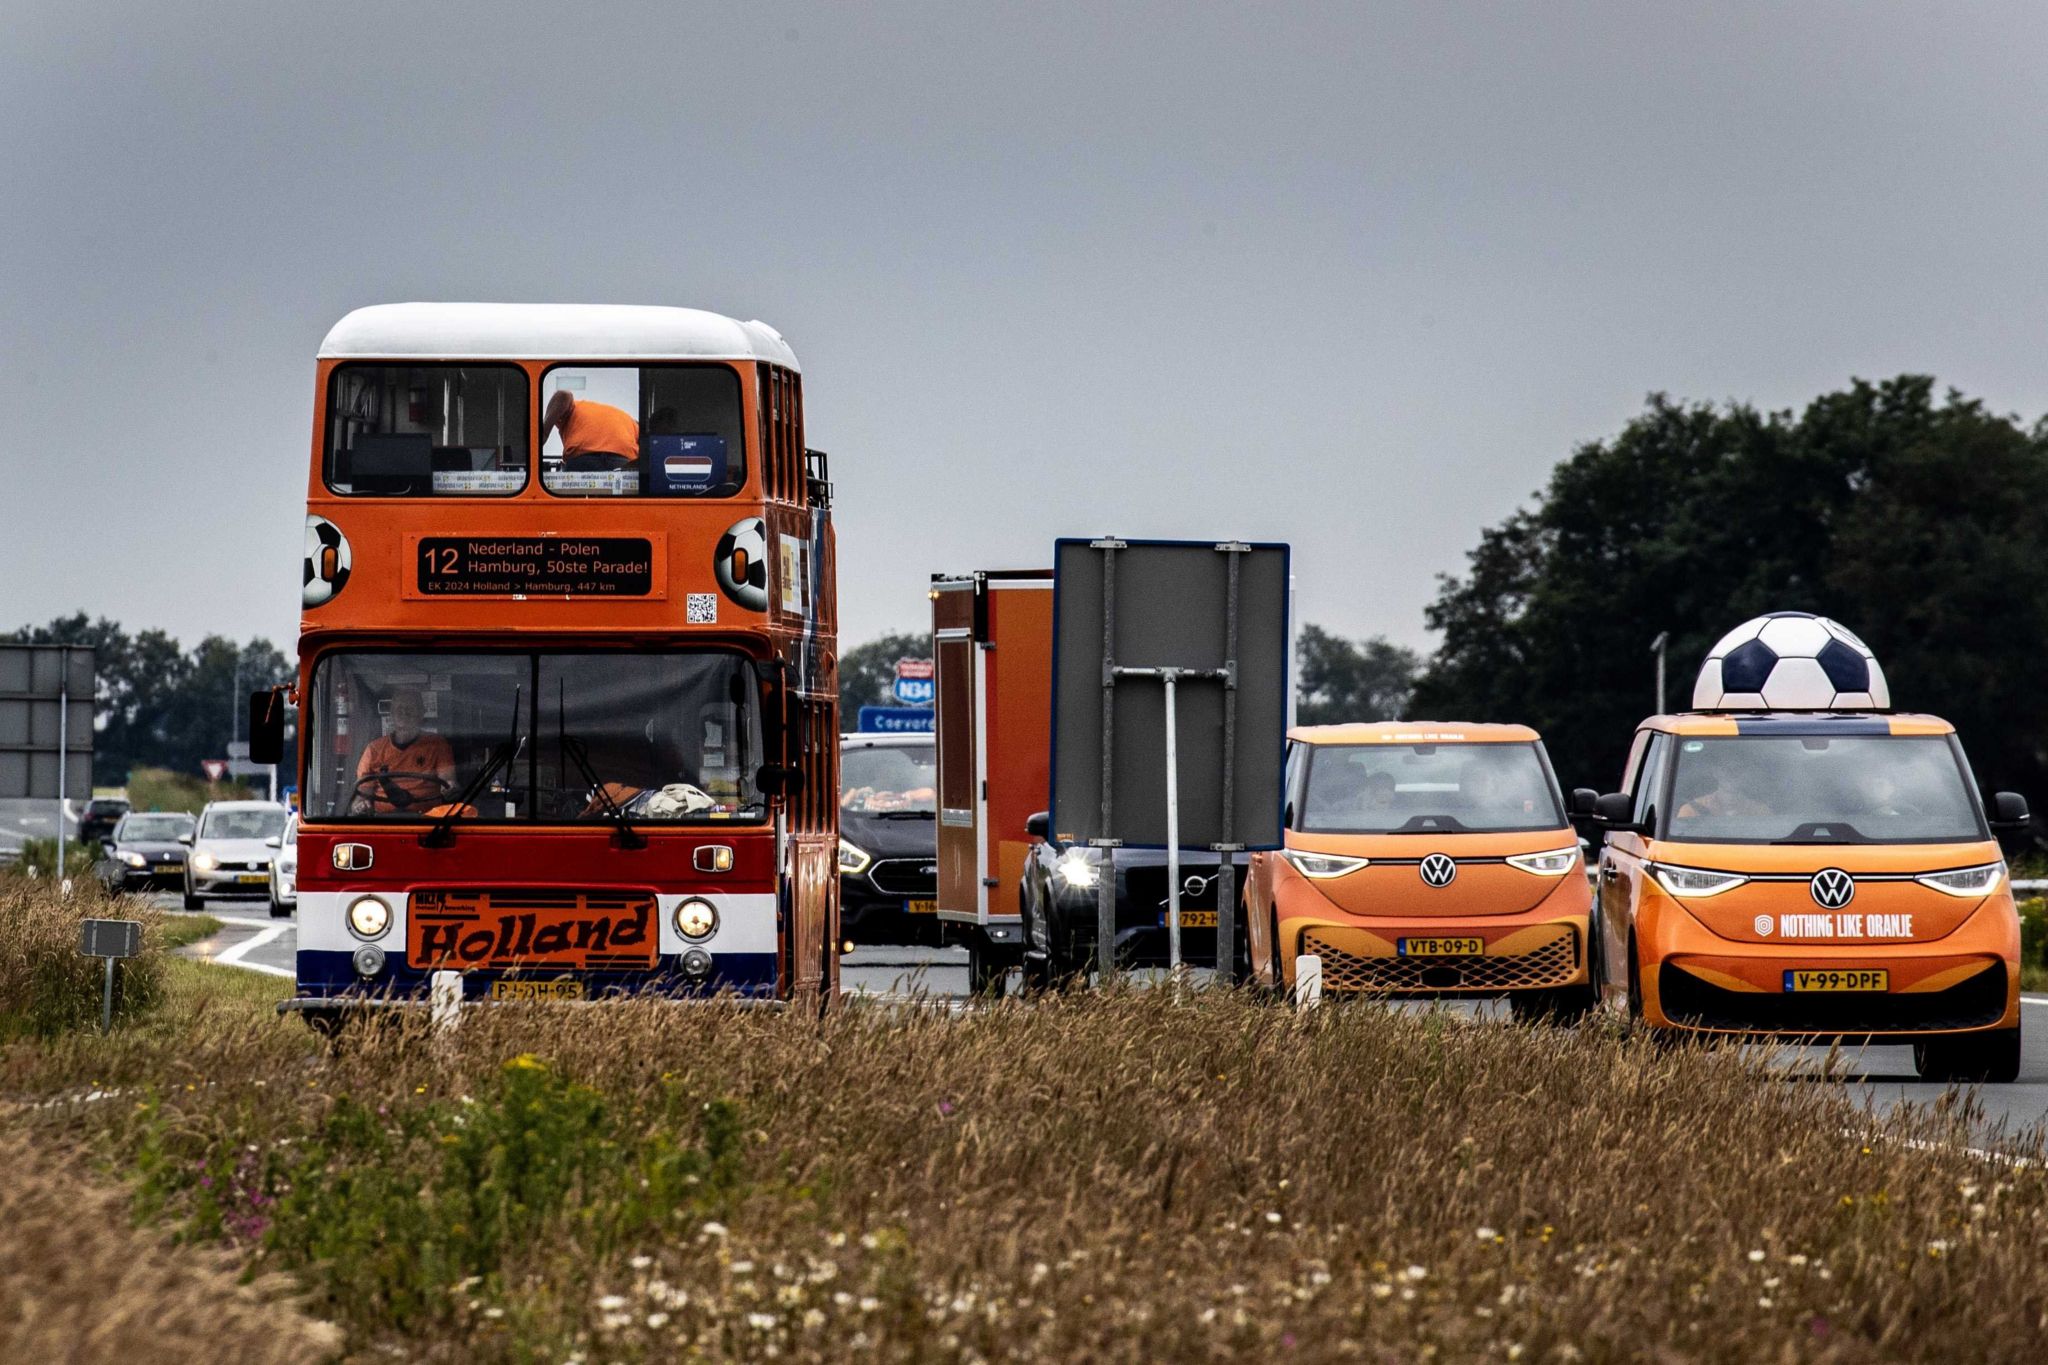 Dutch fans travel to Germany in an orange convoy of vehicles